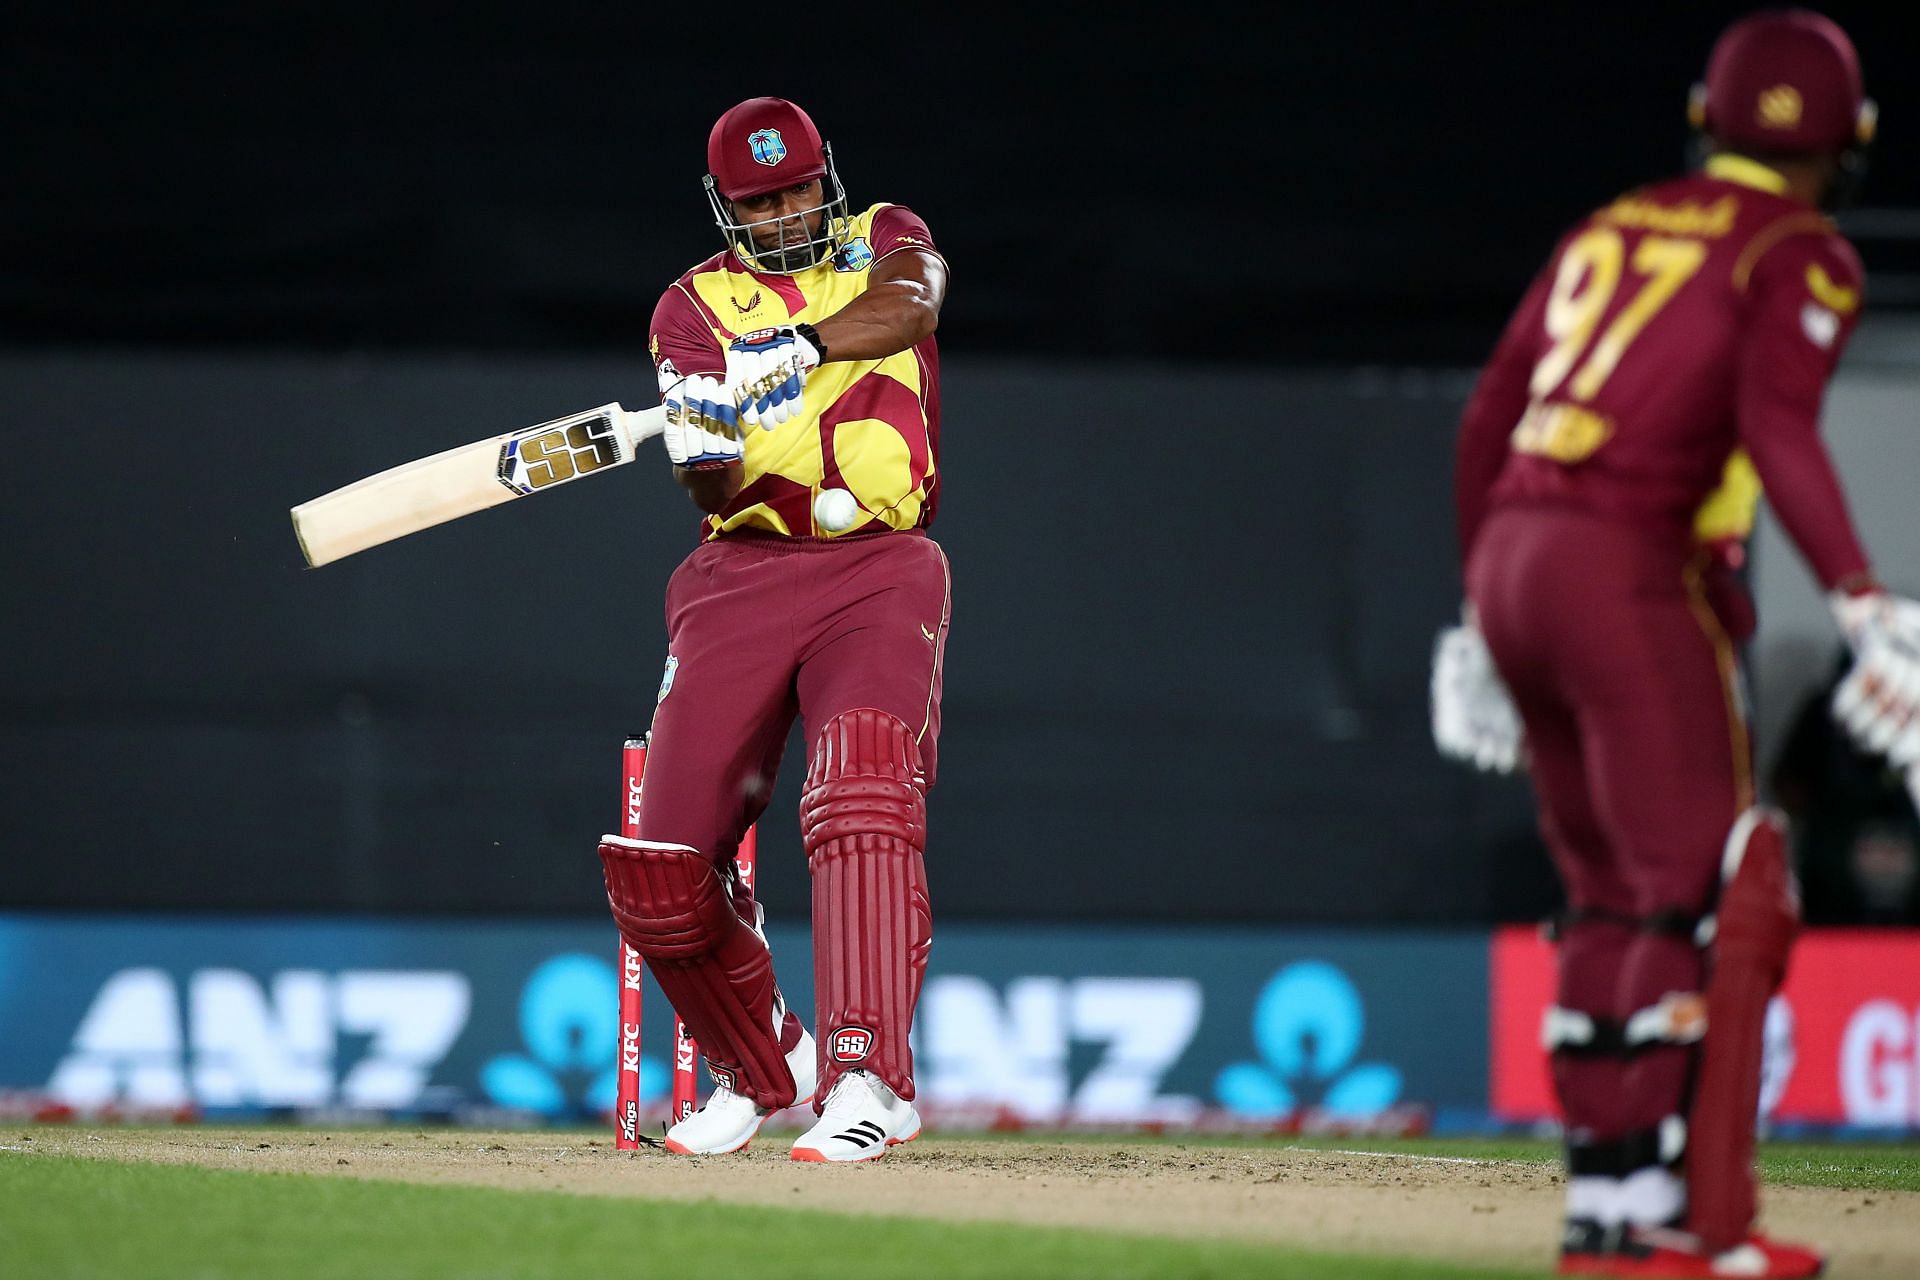 Kieron Pollard will captain West Indies in the ICC T20 World Cup 2021.